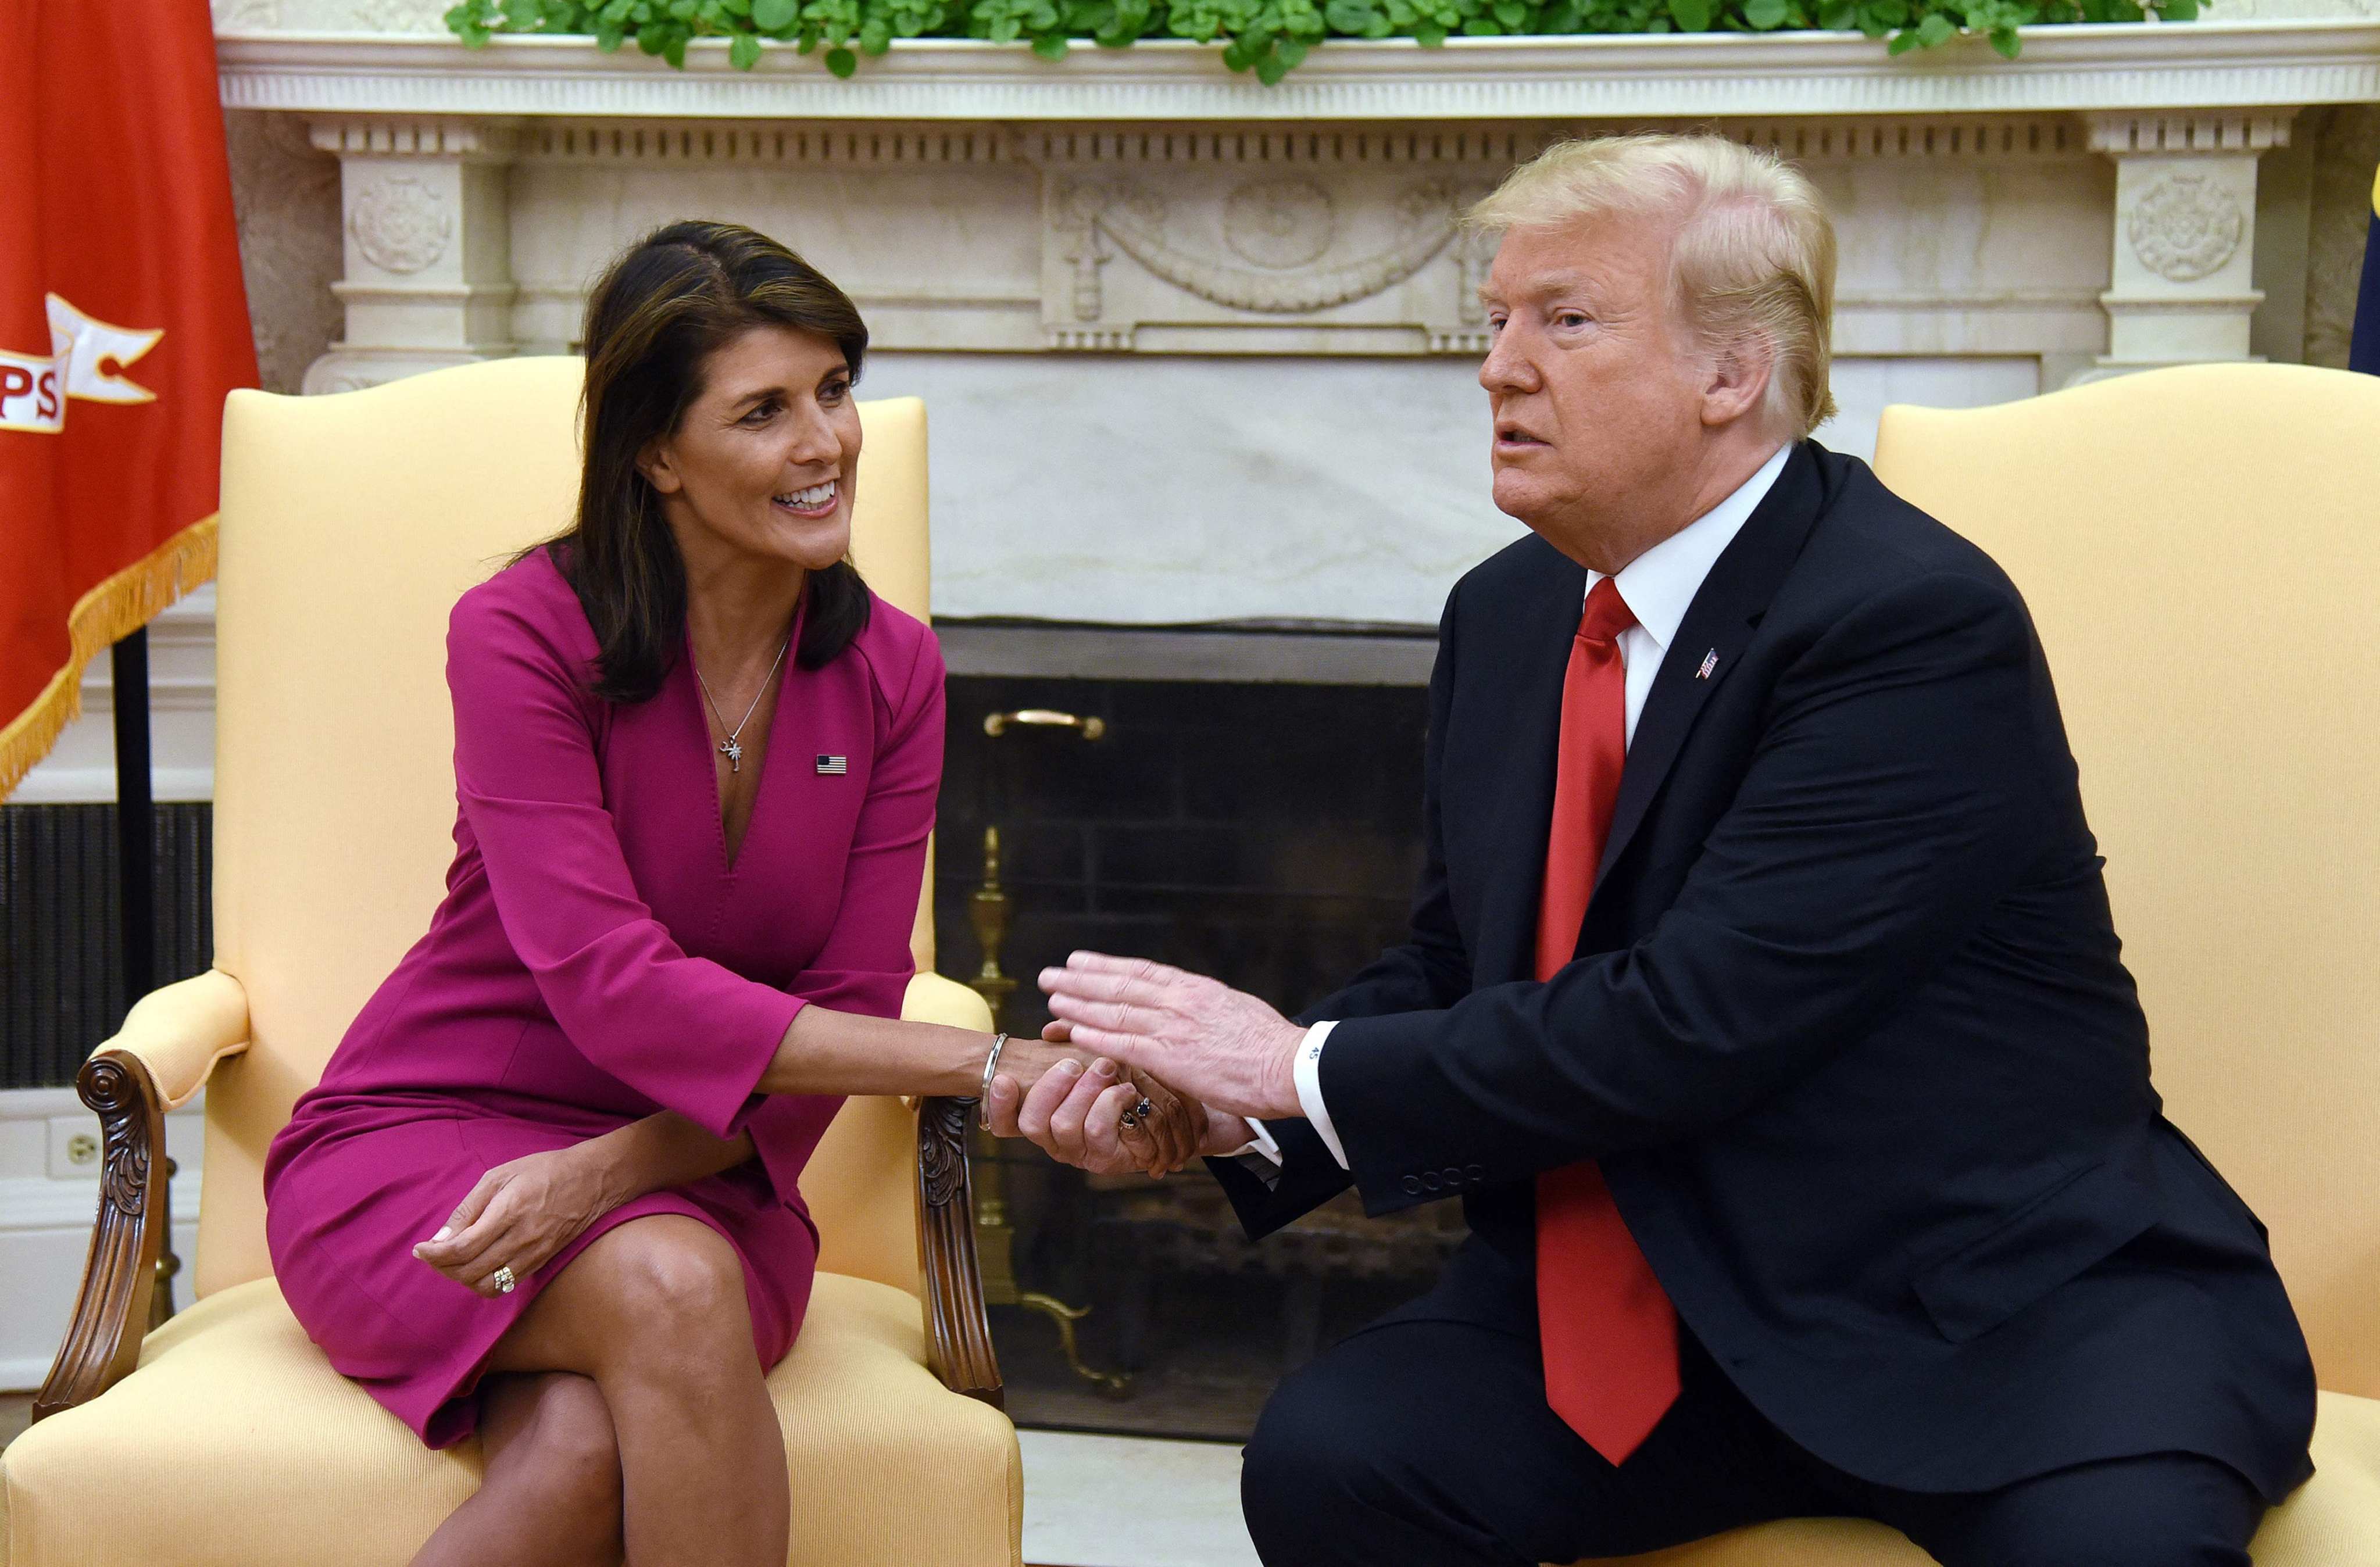 Donald Trump, then US president, shakes hands with Nikki Haley, who served as US ambassador to the United Nations under his administration, on October 9, 2018. Haleyran against Trump in the Republican primaries but now says she will vote for him. Photo: AFP